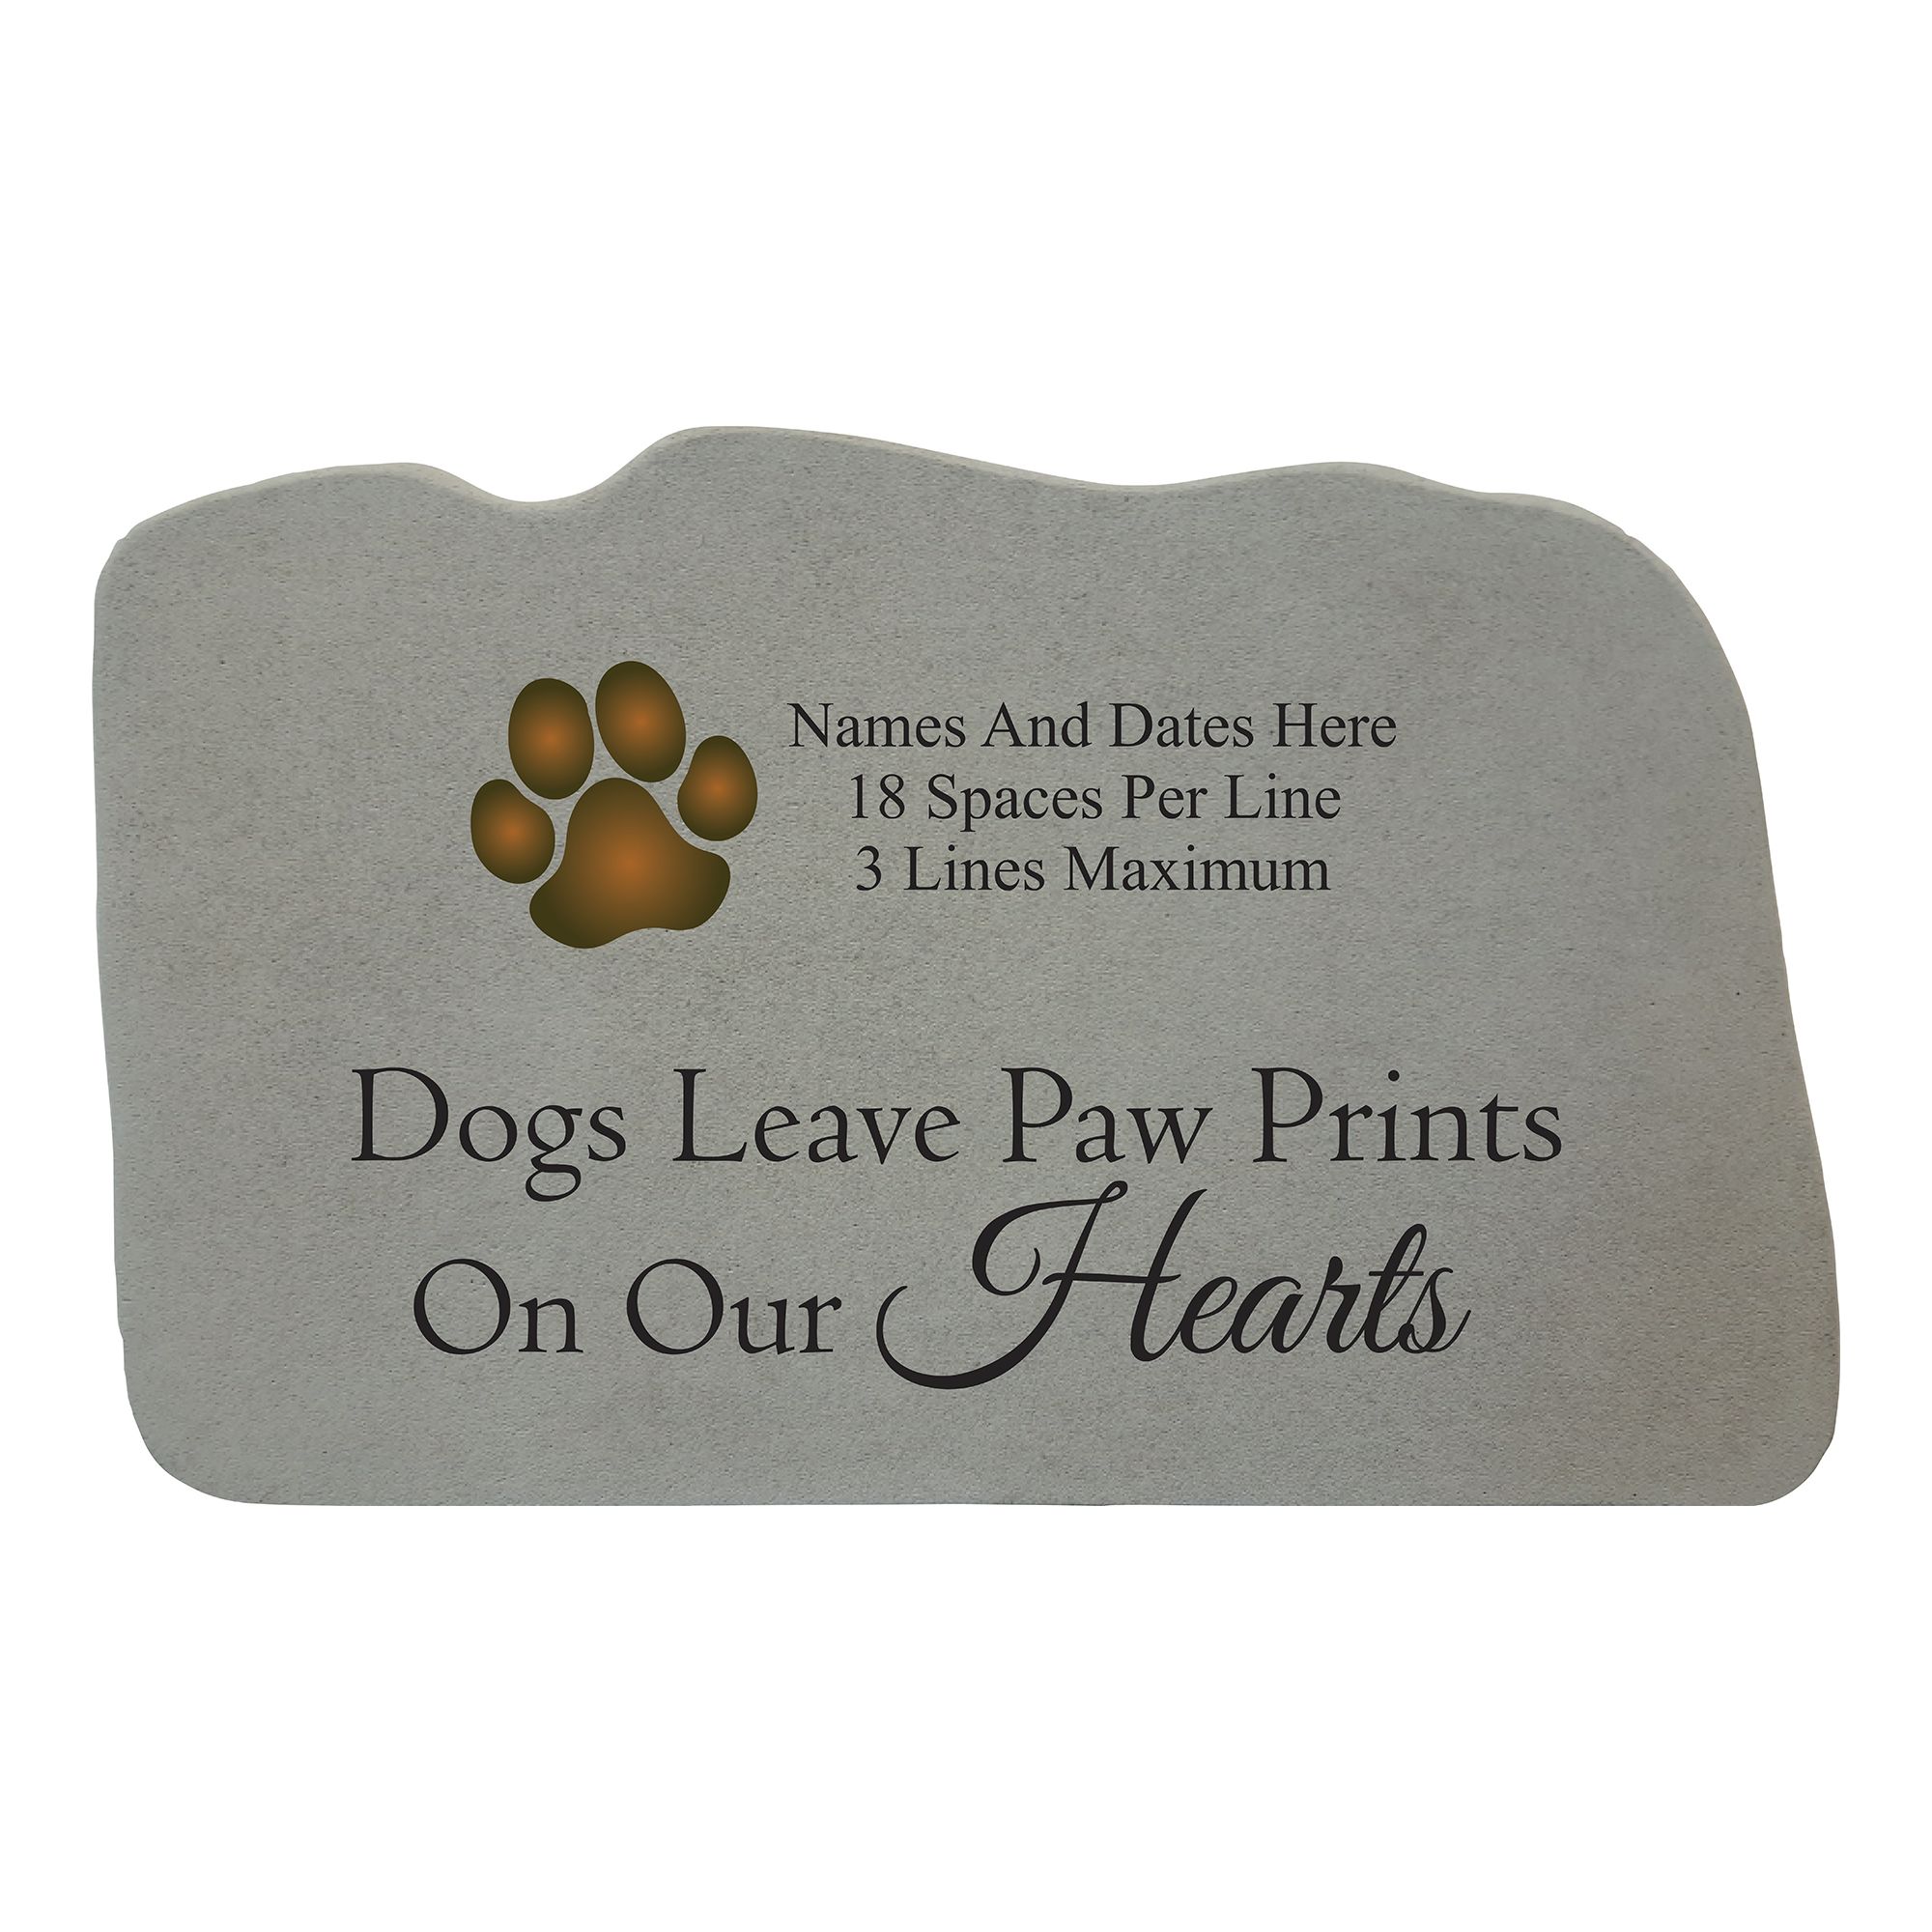 Love is...Being owned by a Pomeranian BLK Pawprints Heart Dog Sign 5x10 Wood 798